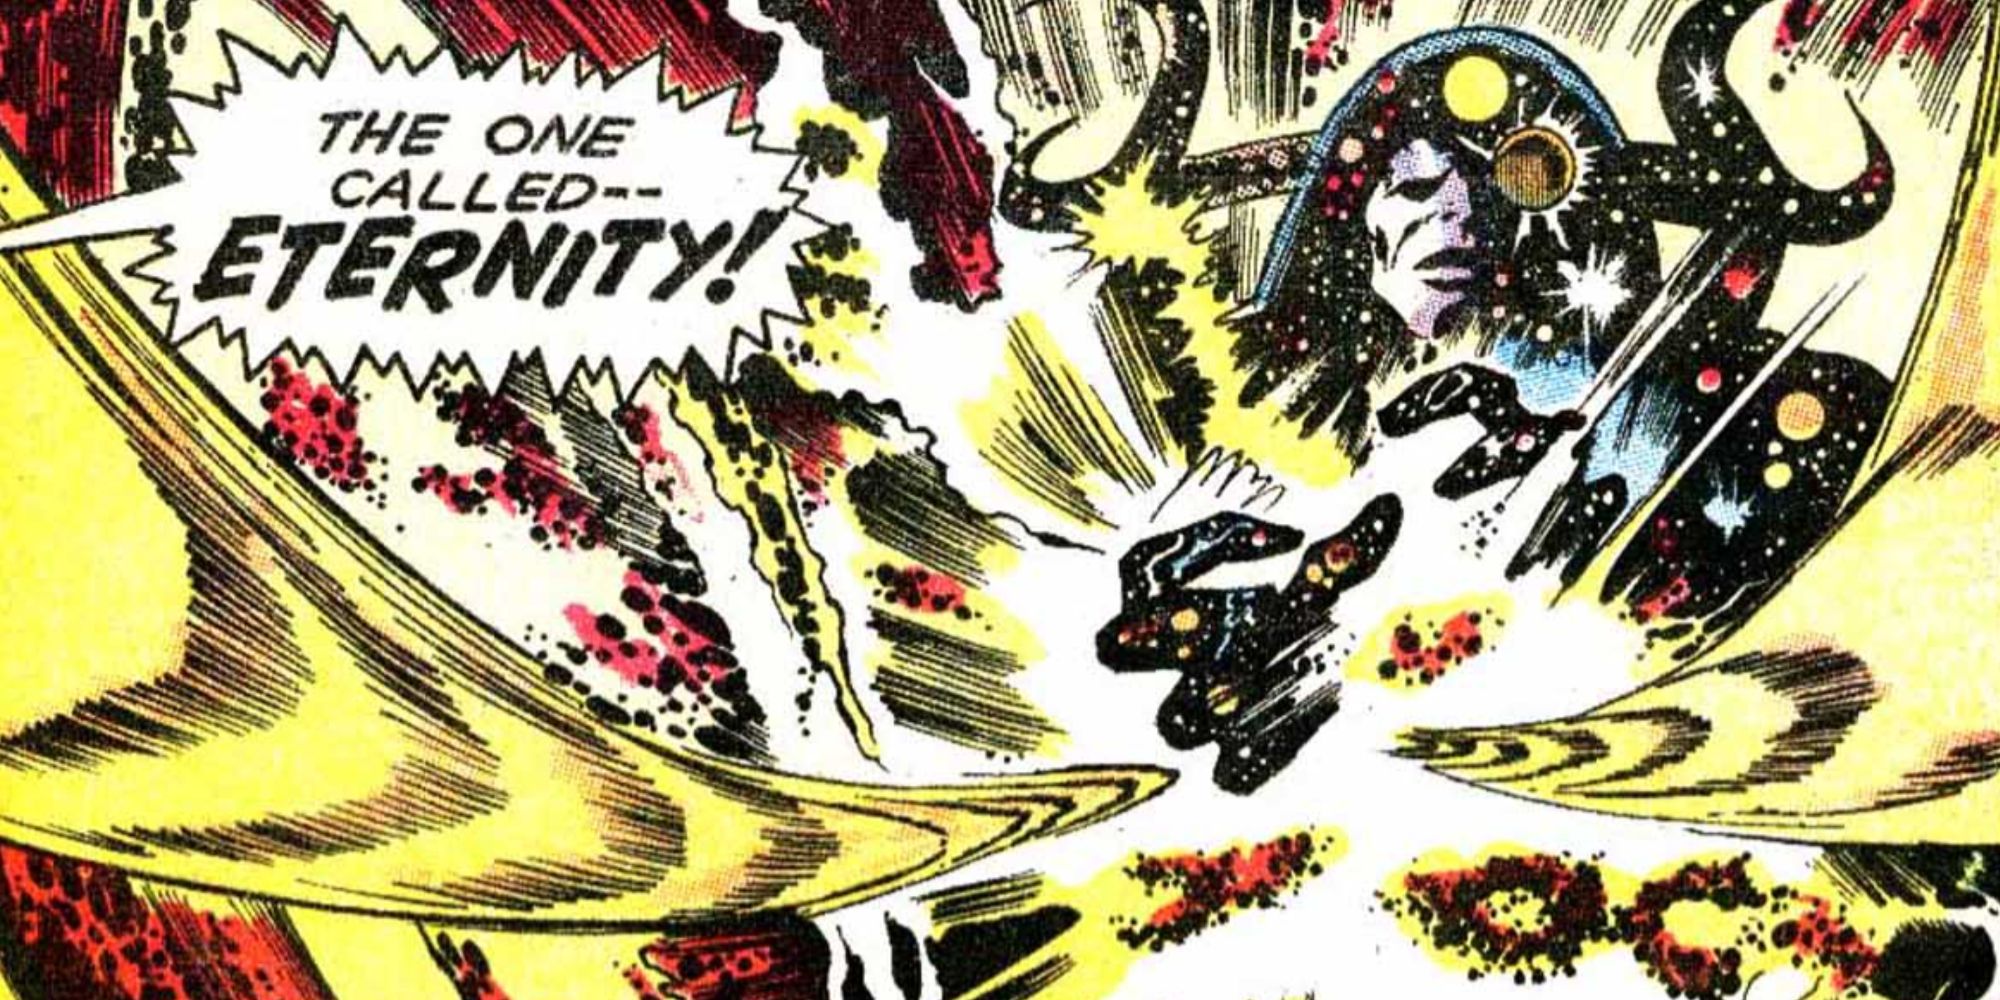 Eternity uses their powers in Marvel Comics.